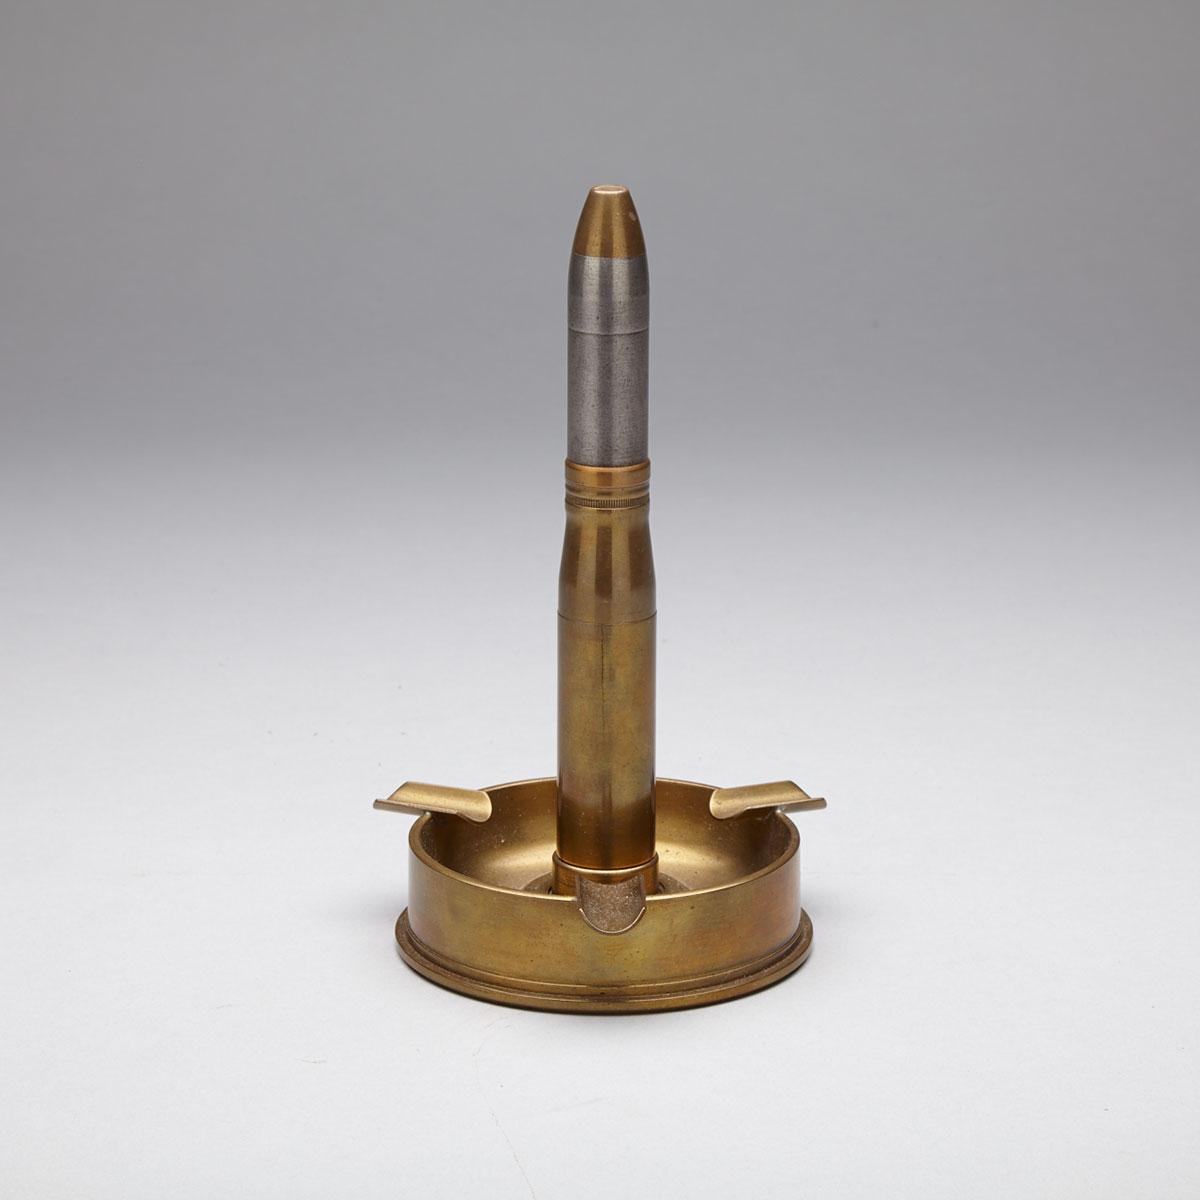 WWII ‘Trench Art’ Artillery Shell Casing Ashtray with Cigarette Lighter, c.1945